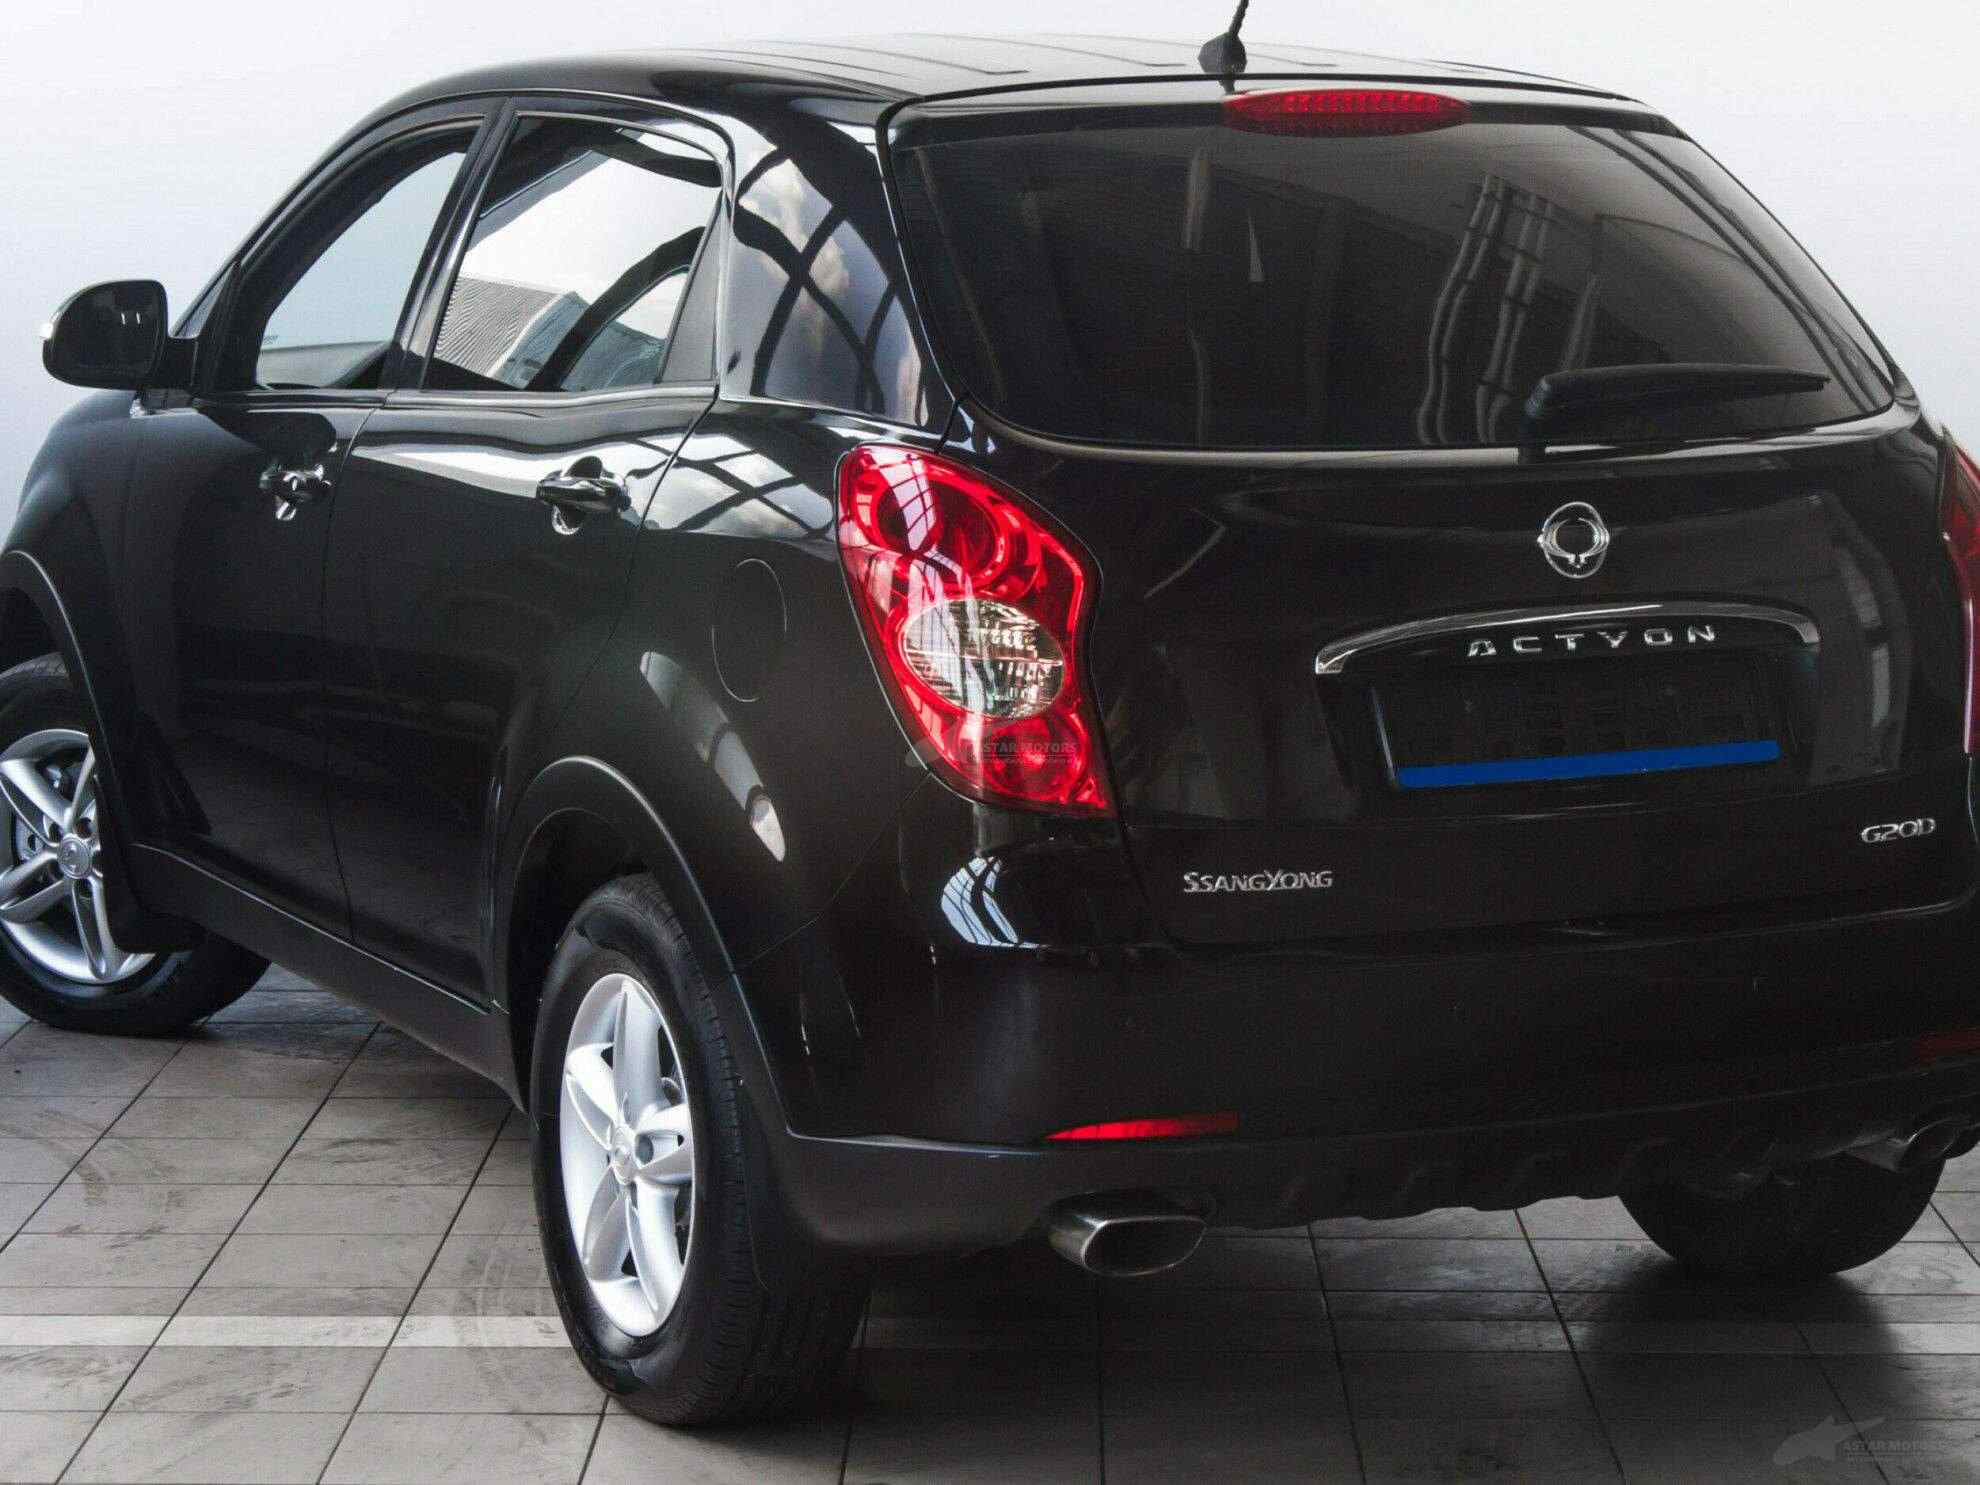 Ssangyong new actyon 2013. Саньенг Актион 2013. SSANGYONG Actyon 2. Санг енг Актион 2013.